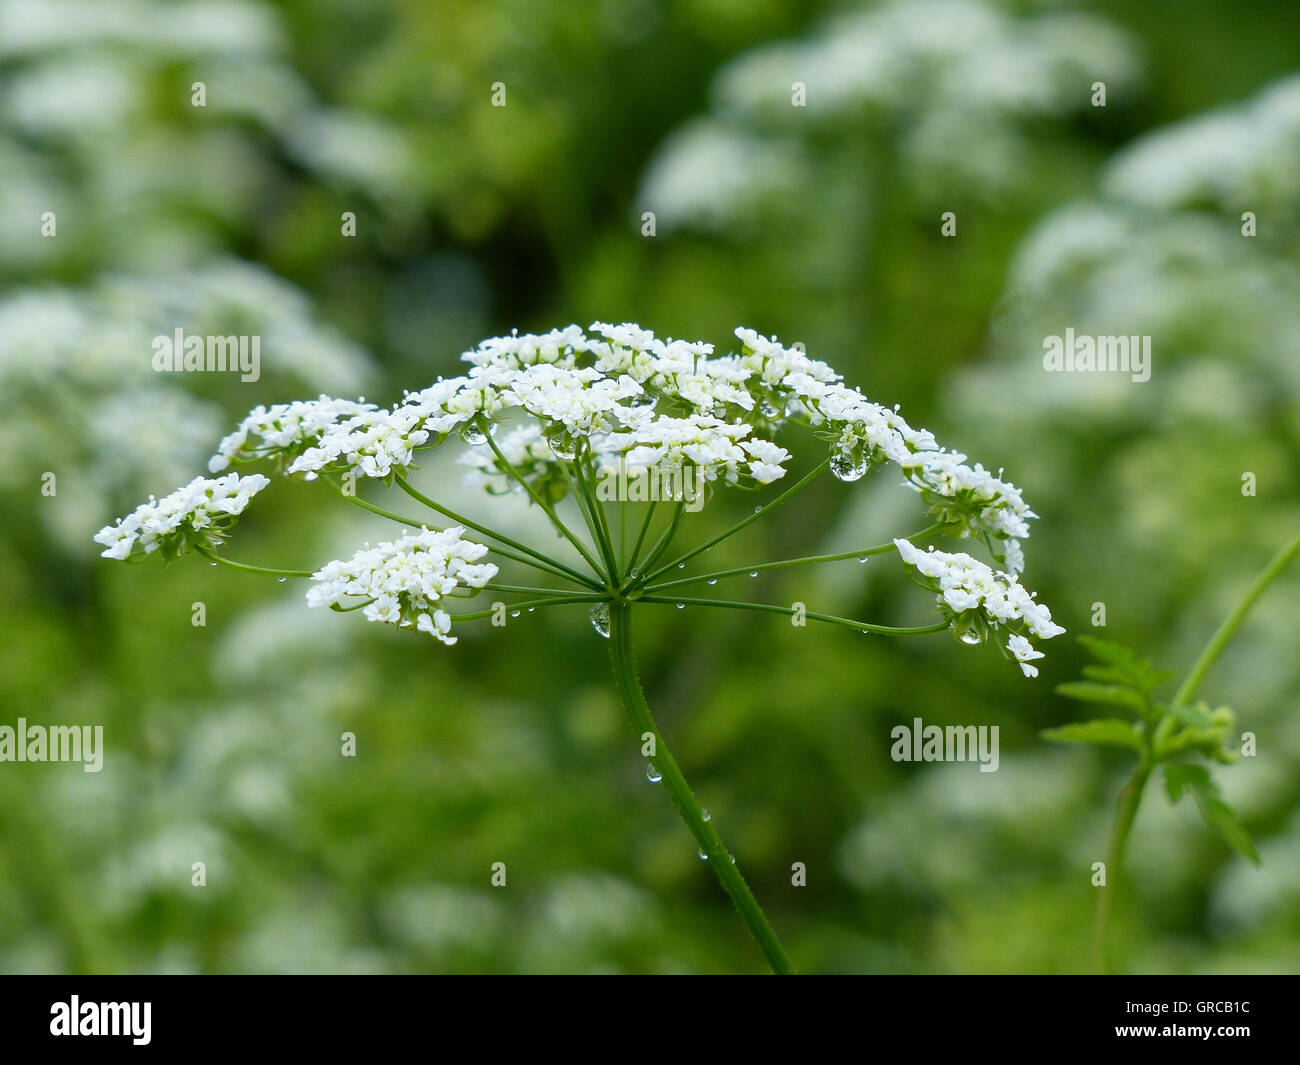 White Umbellifer, Fool S Parsley, Very Highly Poisonous Stock Photo - Alamy